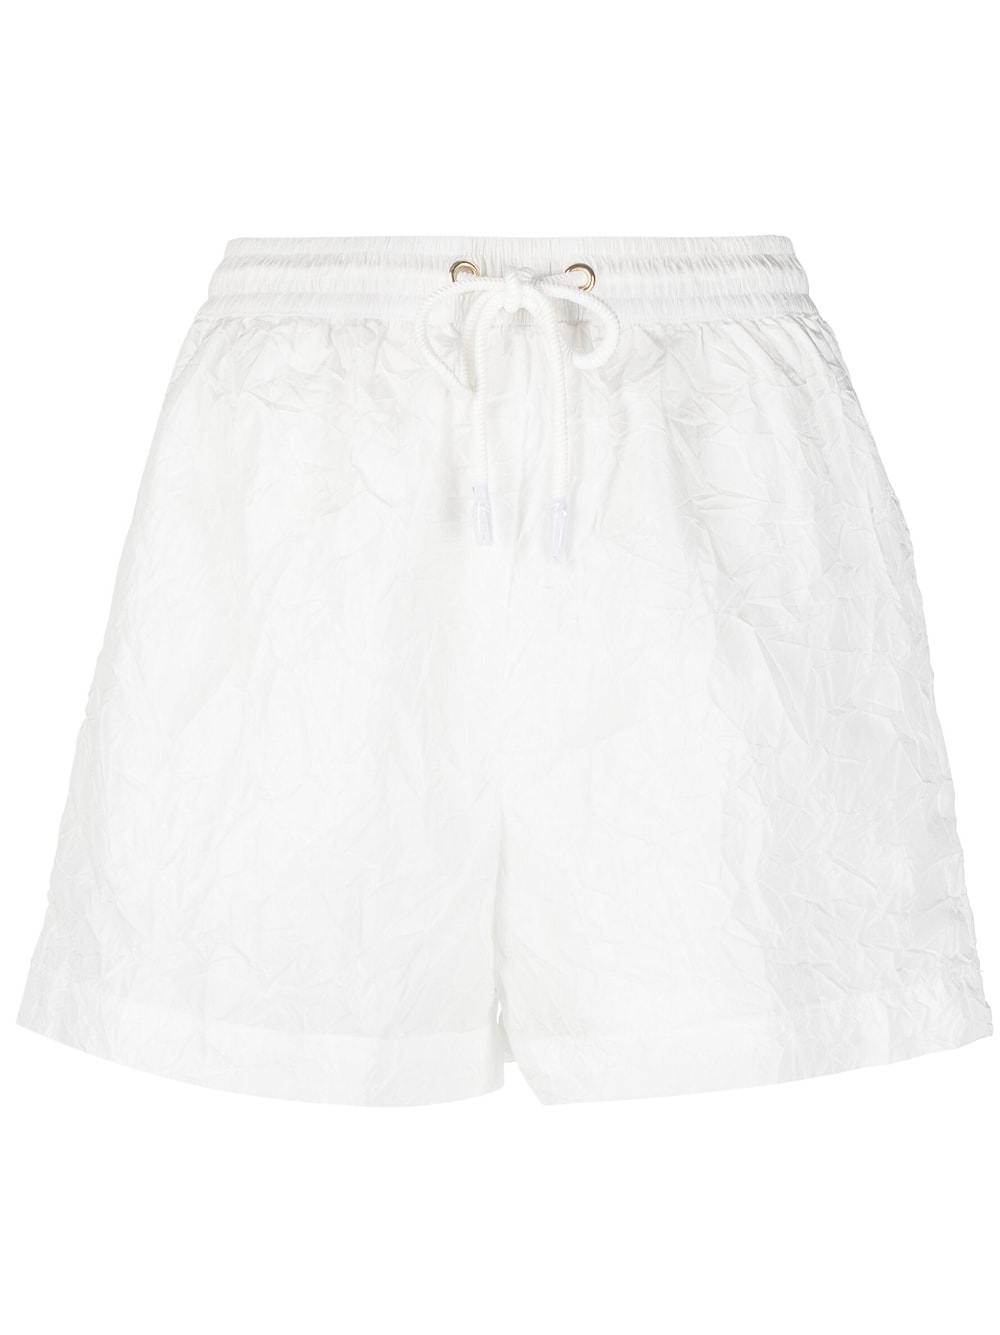 P.E Nation Volley high-wasited shorts - White